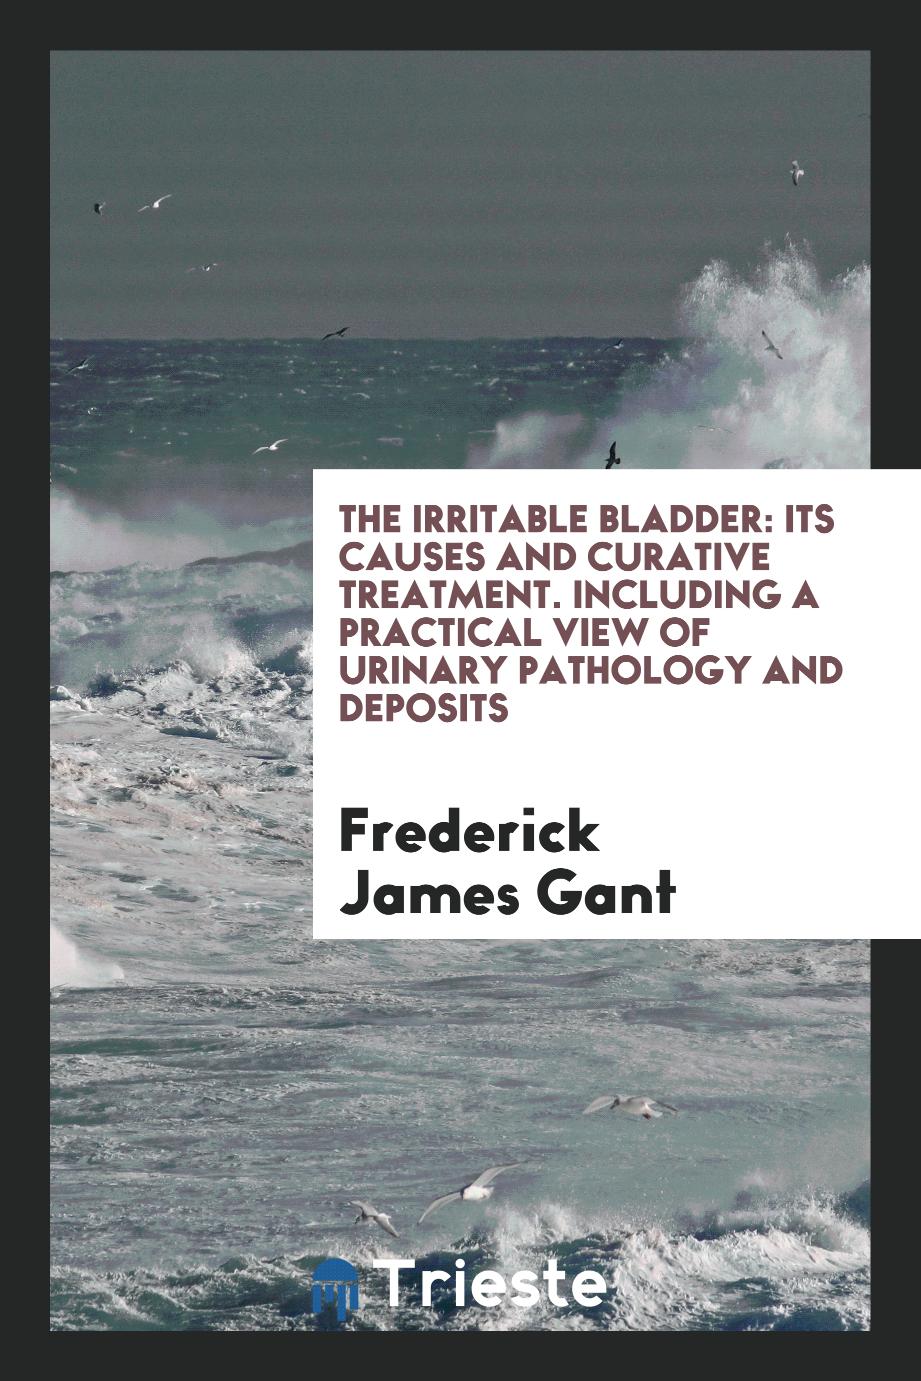 The Irritable Bladder: Its Causes and Curative Treatment. Including a Practical View of Urinary Pathology and Deposits